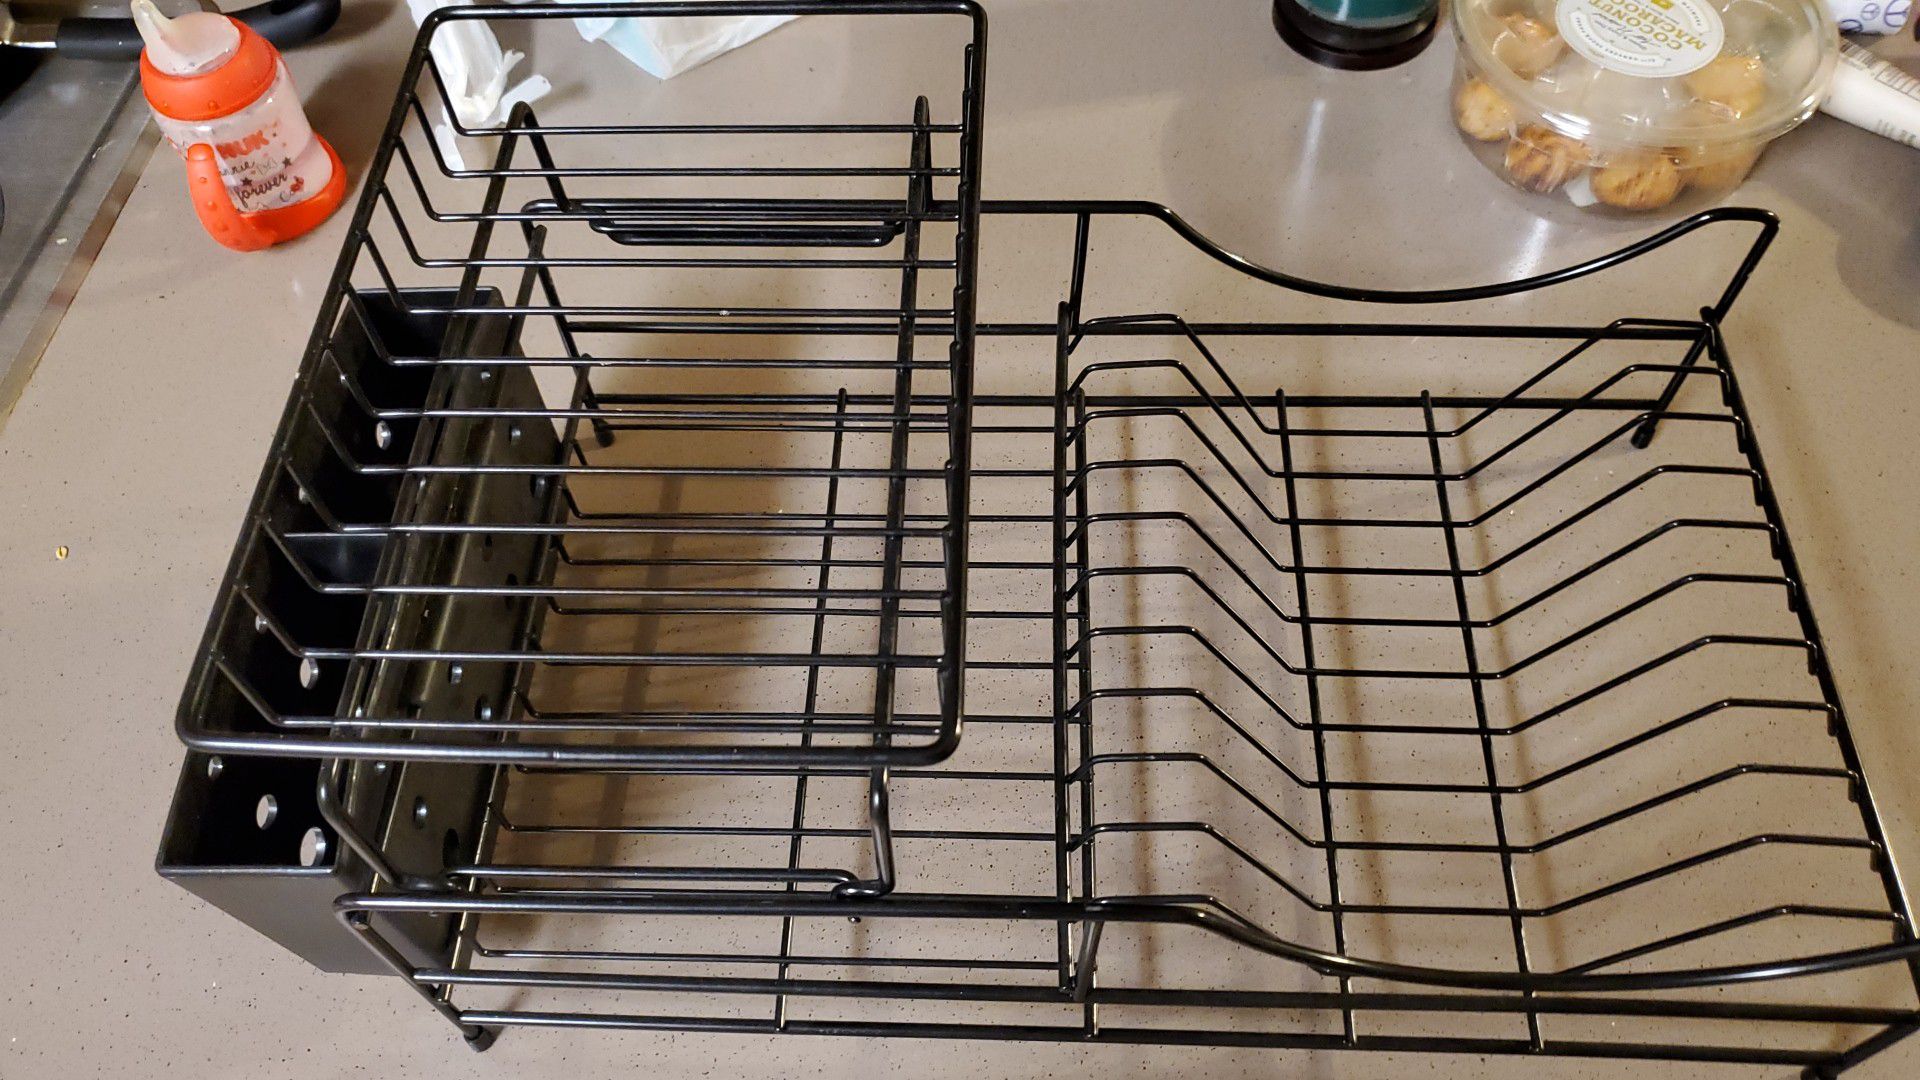 Dishes drainer